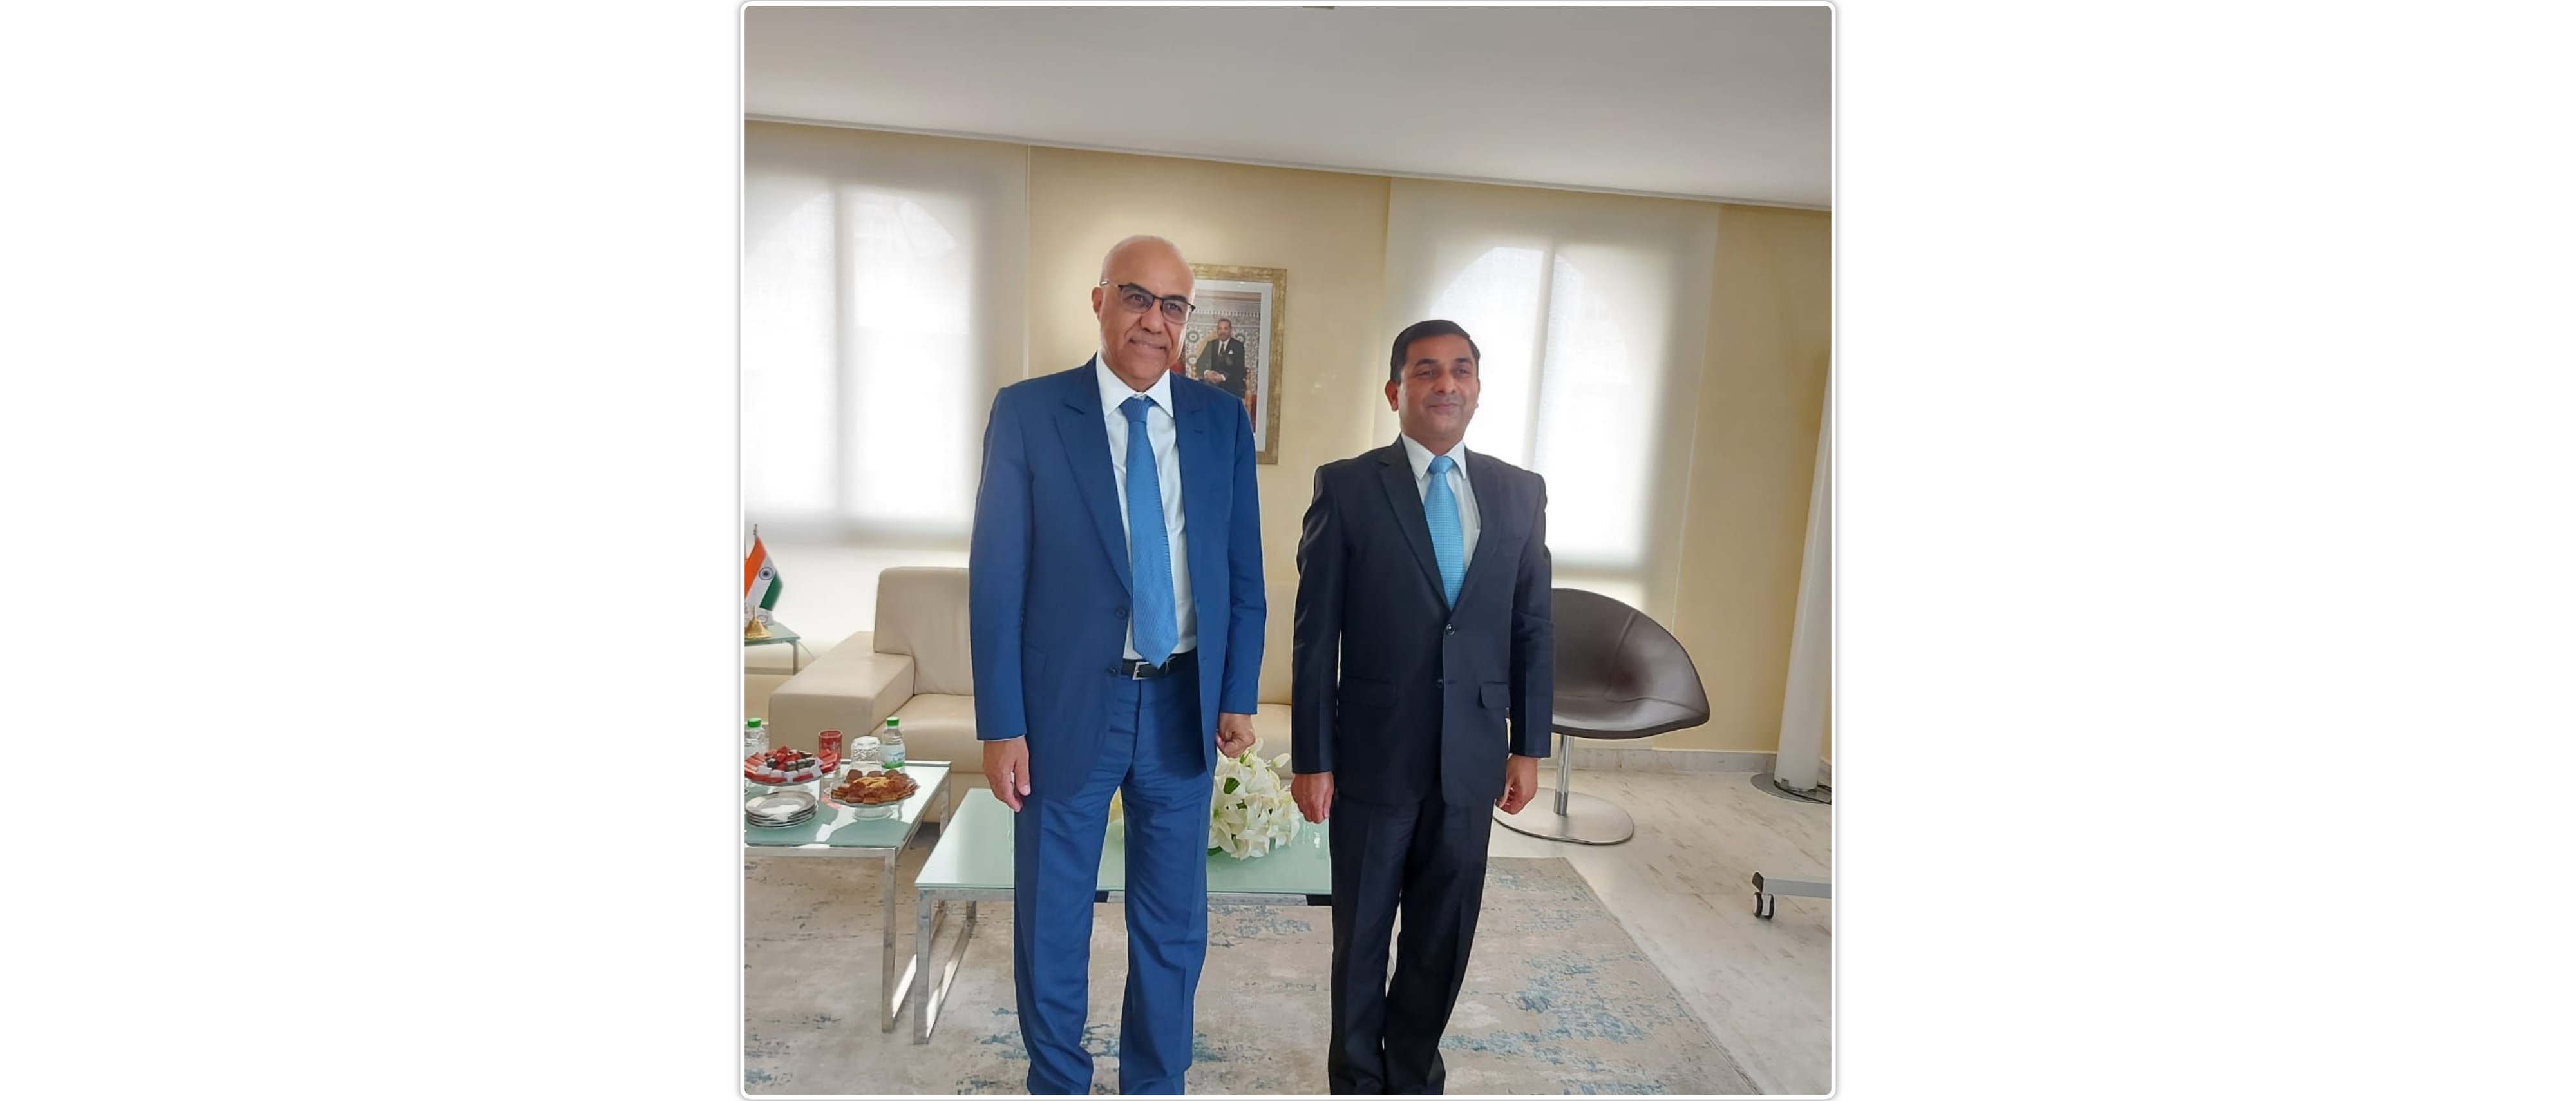  H.E Ambassador Rajesh Vaishnaw meeting H.E. Minister of Higher Education, Scientific Research and Innovation of Kingdom of Morocco, Mr. Abdellatif Miraoui 